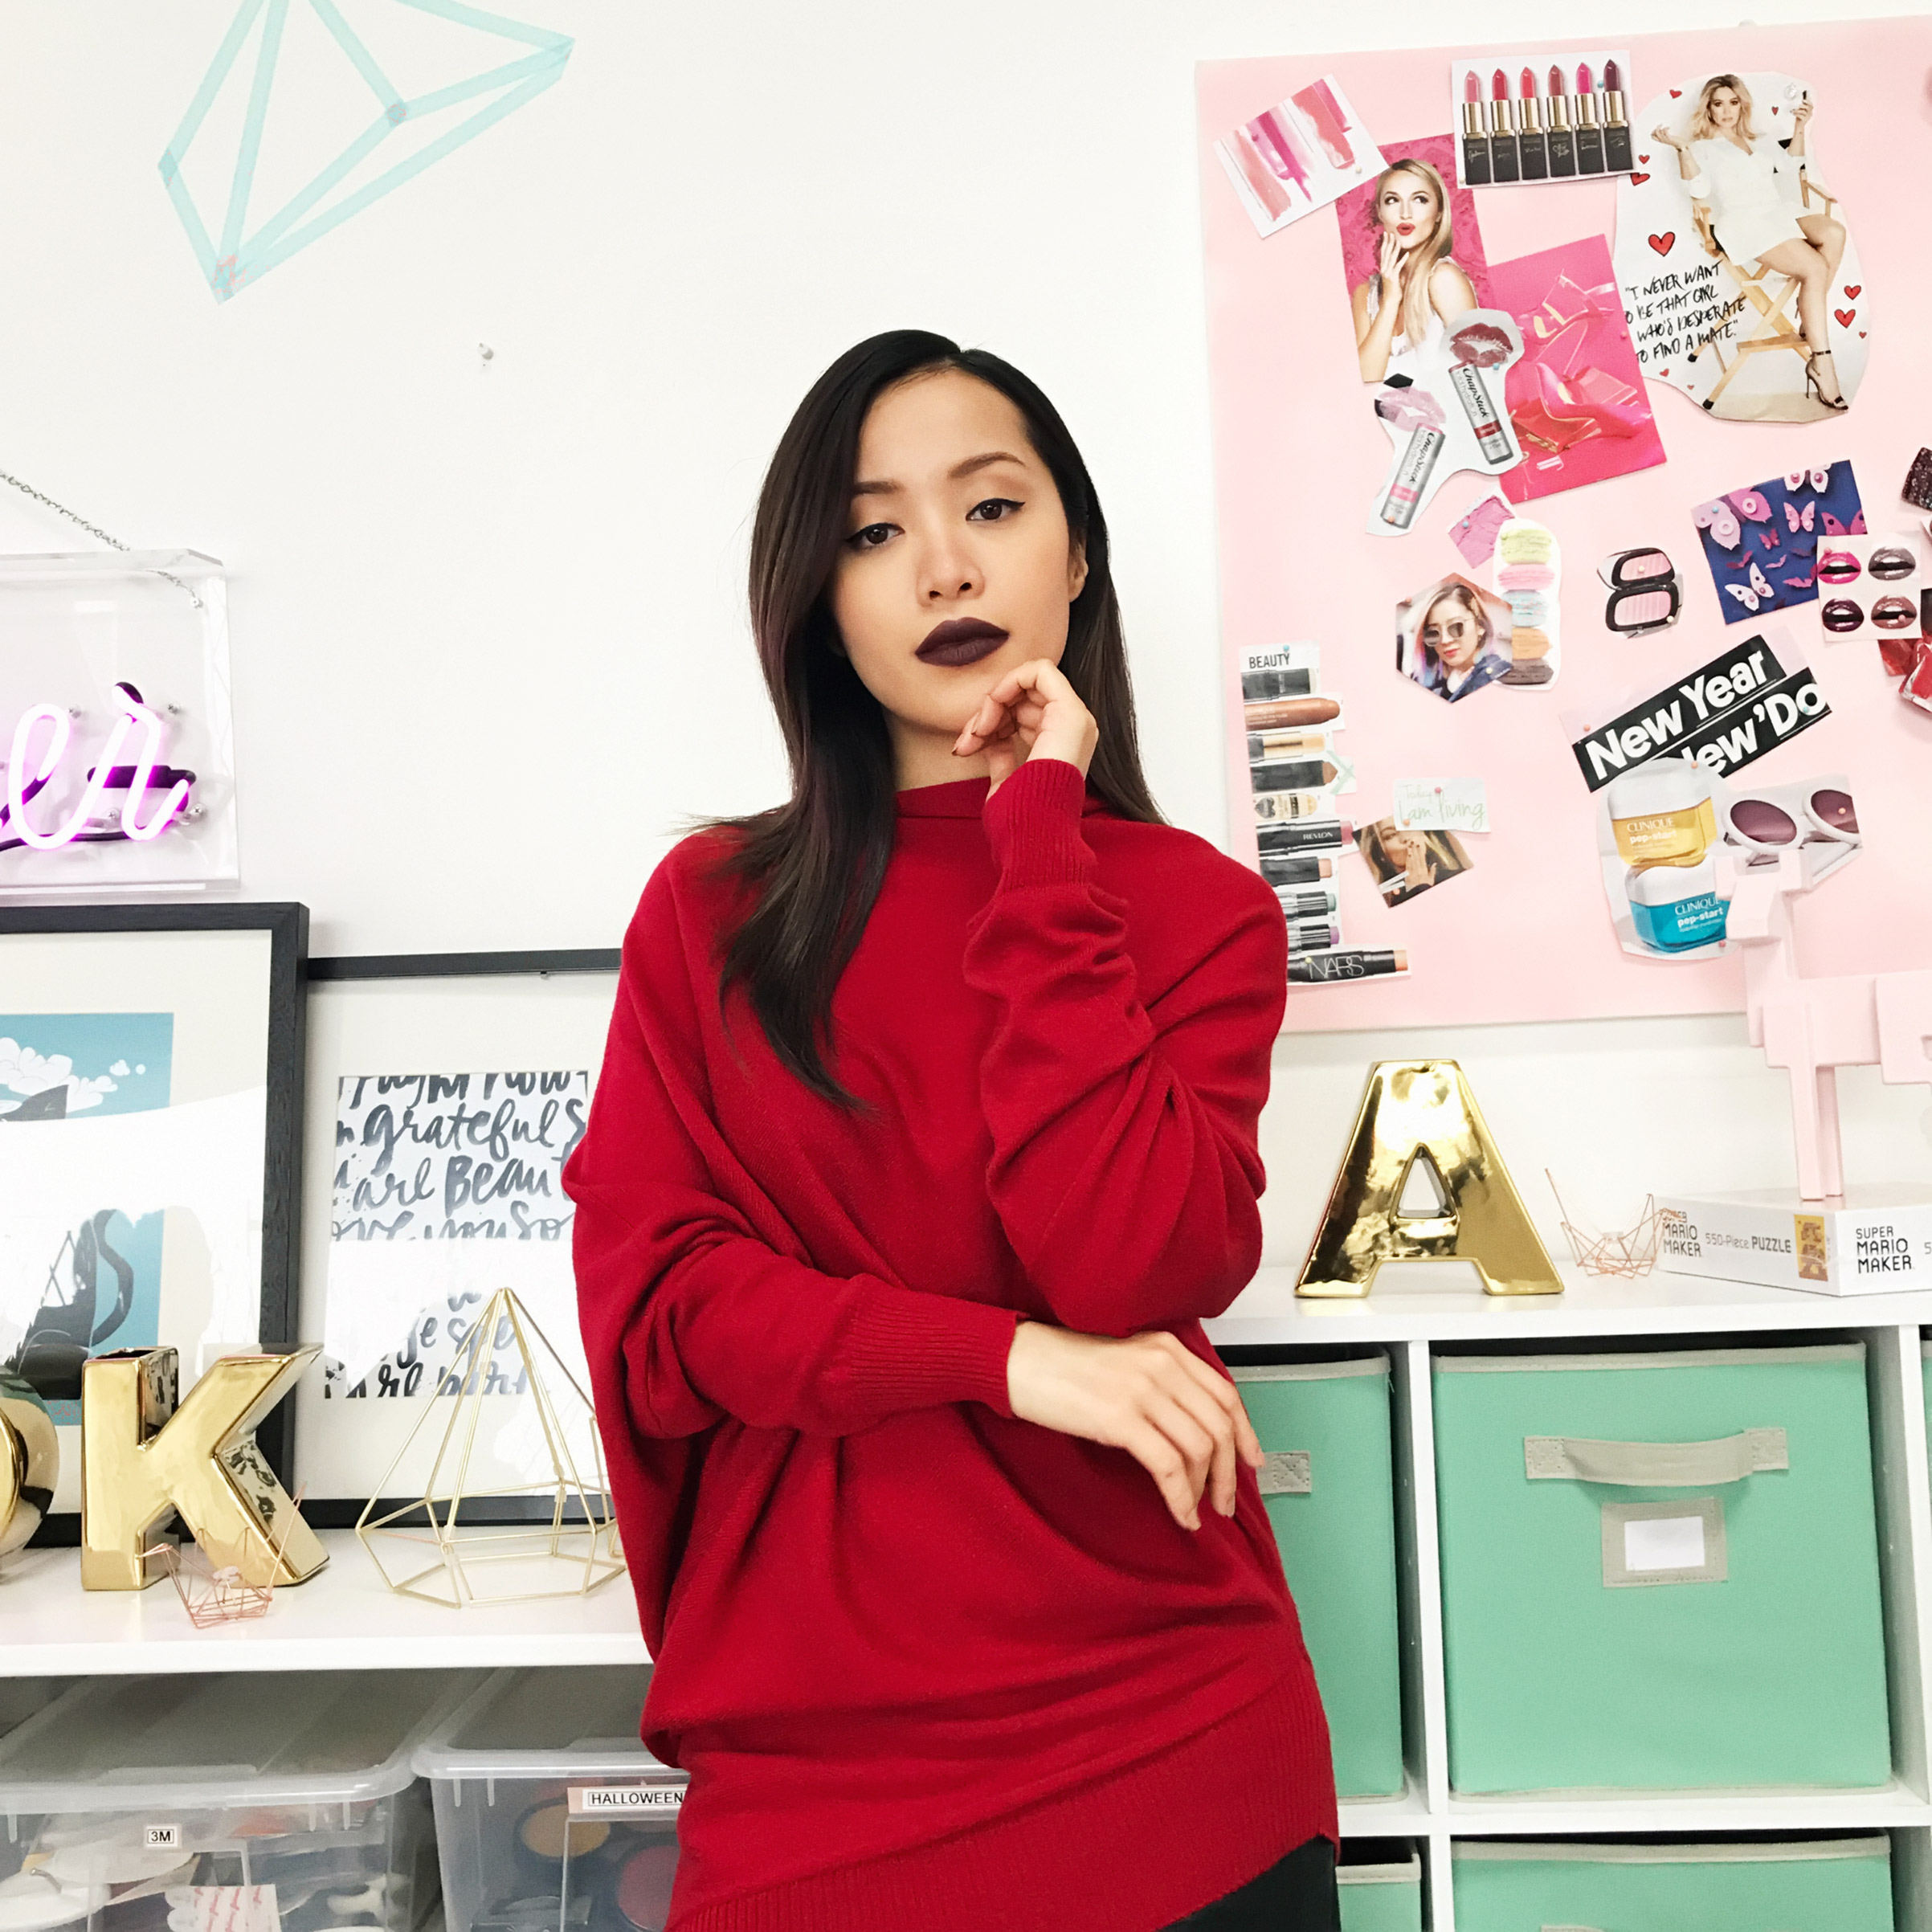 Portrait of Michelle Phan, photographed at Ipsy Open Studios in Santa Monica, CA on February 7, 2017. (Luisa Dörr for TIME)